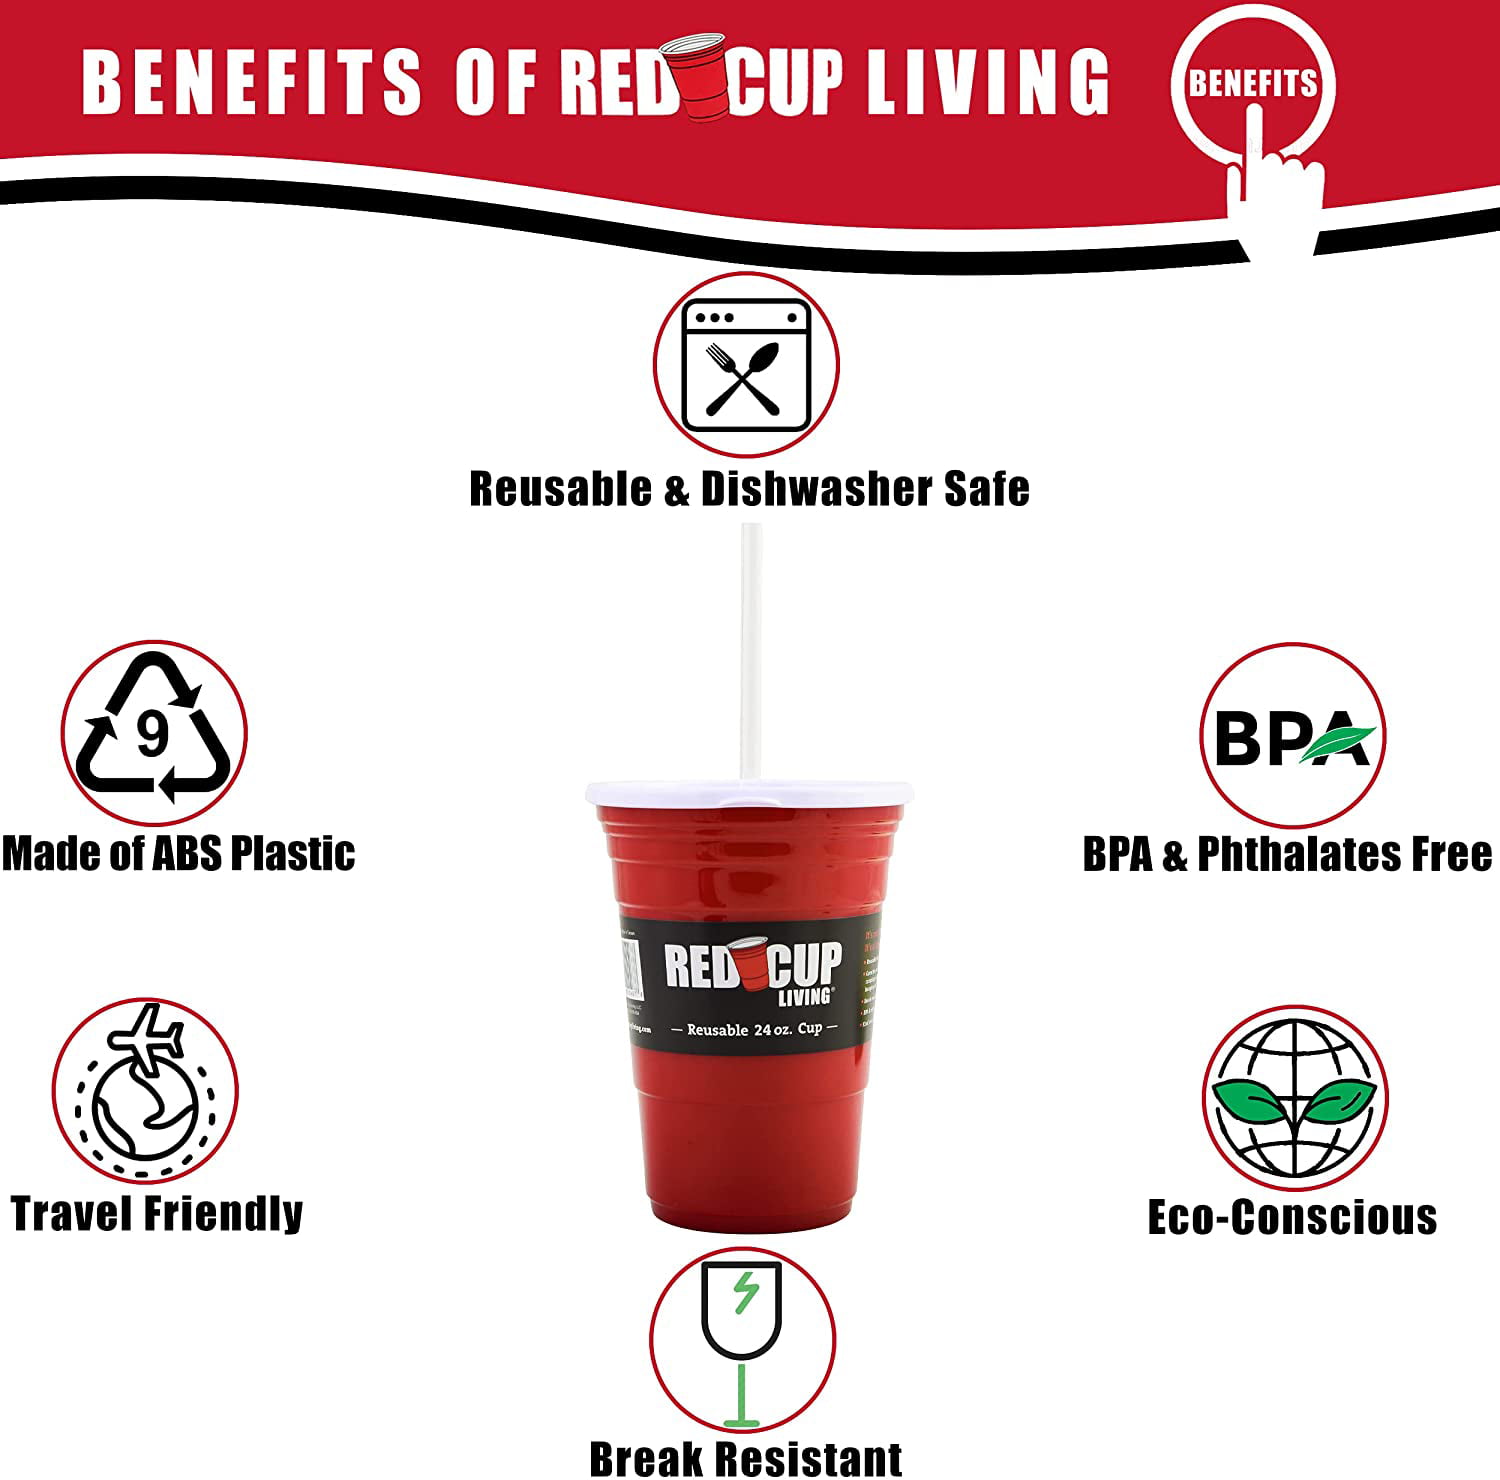 D'Eco Reusable 16 oz Red Party Cups (6 Pack) - Unbreakable Stainless Steel  Dishwasher Safe Drinking …See more D'Eco Reusable 16 oz Red Party Cups (6